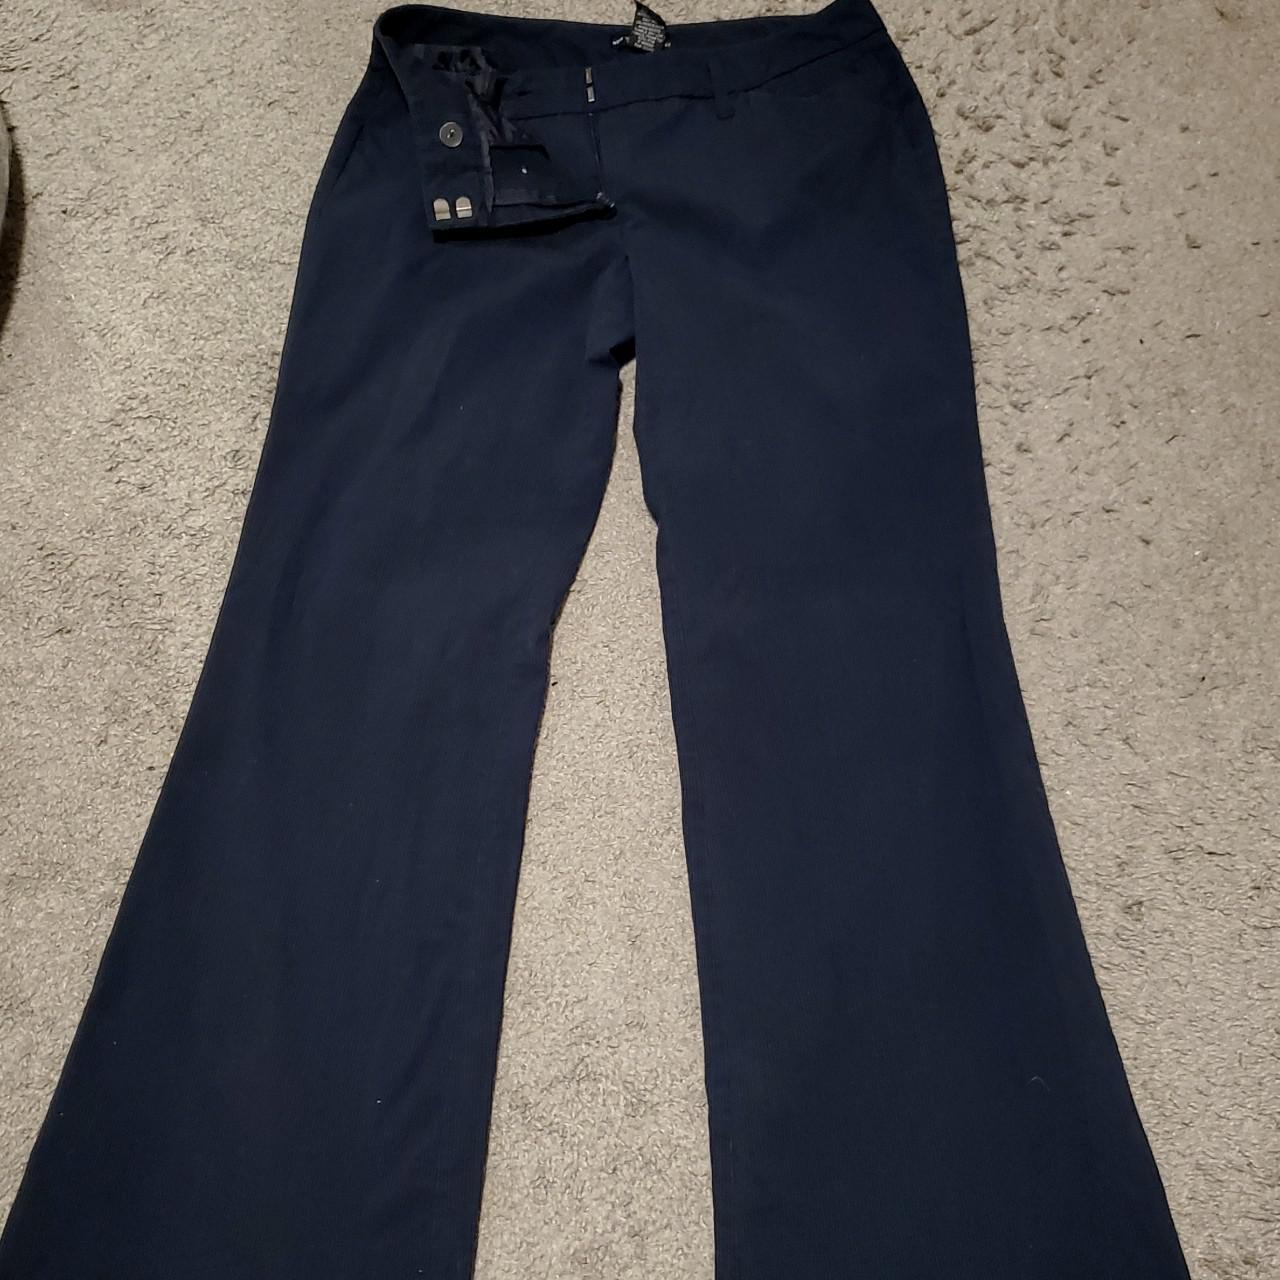 New York Filthy Women's Navy and Blue Jeans (3)